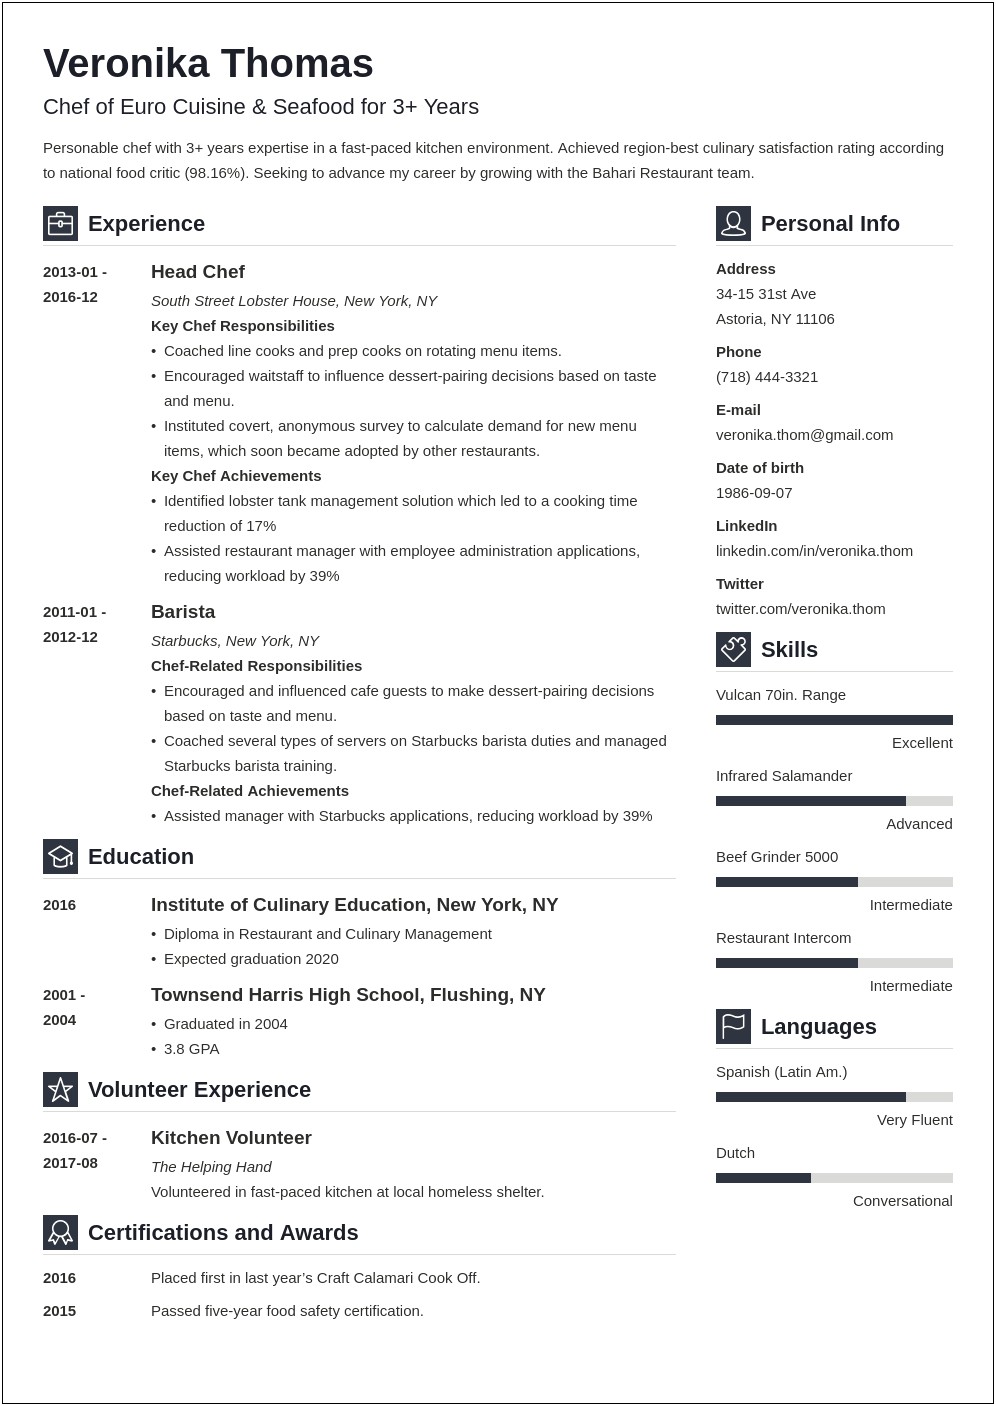 Sample Resumes For Executive Chefs